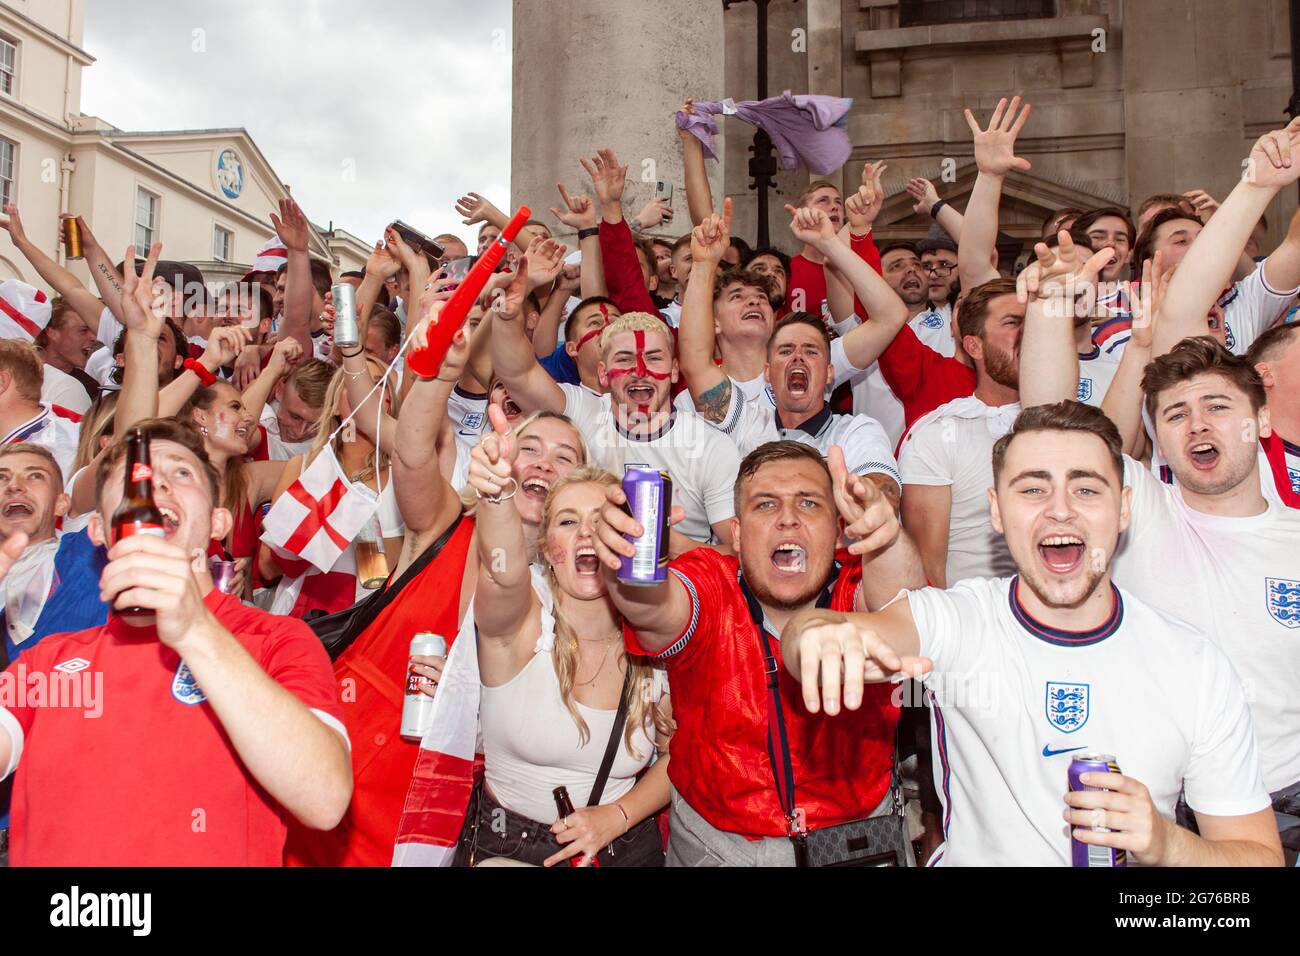 London, England. 11 Jul 2021. Wall of drunk fans celebrate outside trafalgar square in preperation for England v italy match. Credit: Stefan Weil/Alamy Live News Stock Photo